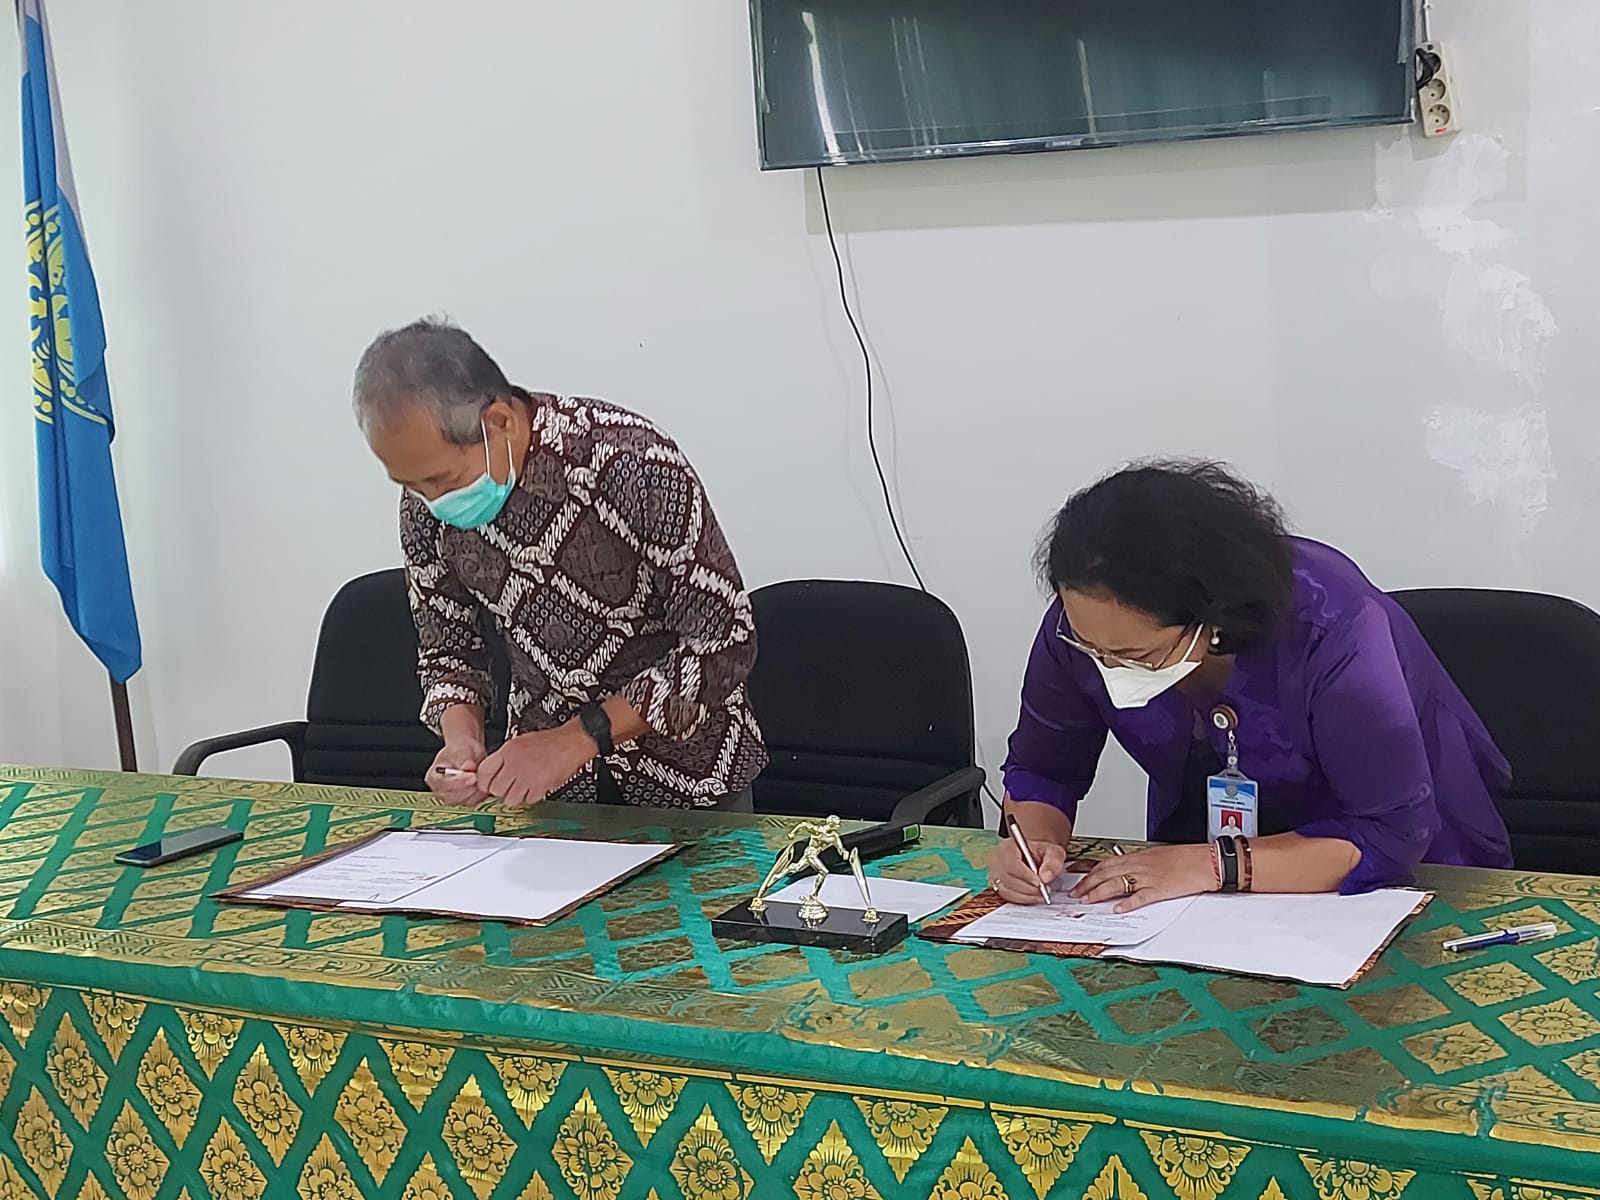 The Faculty of Mathematics and Natural Sciences Unud carries out benchmarking activities for collaboration and implementation of the MBKM program